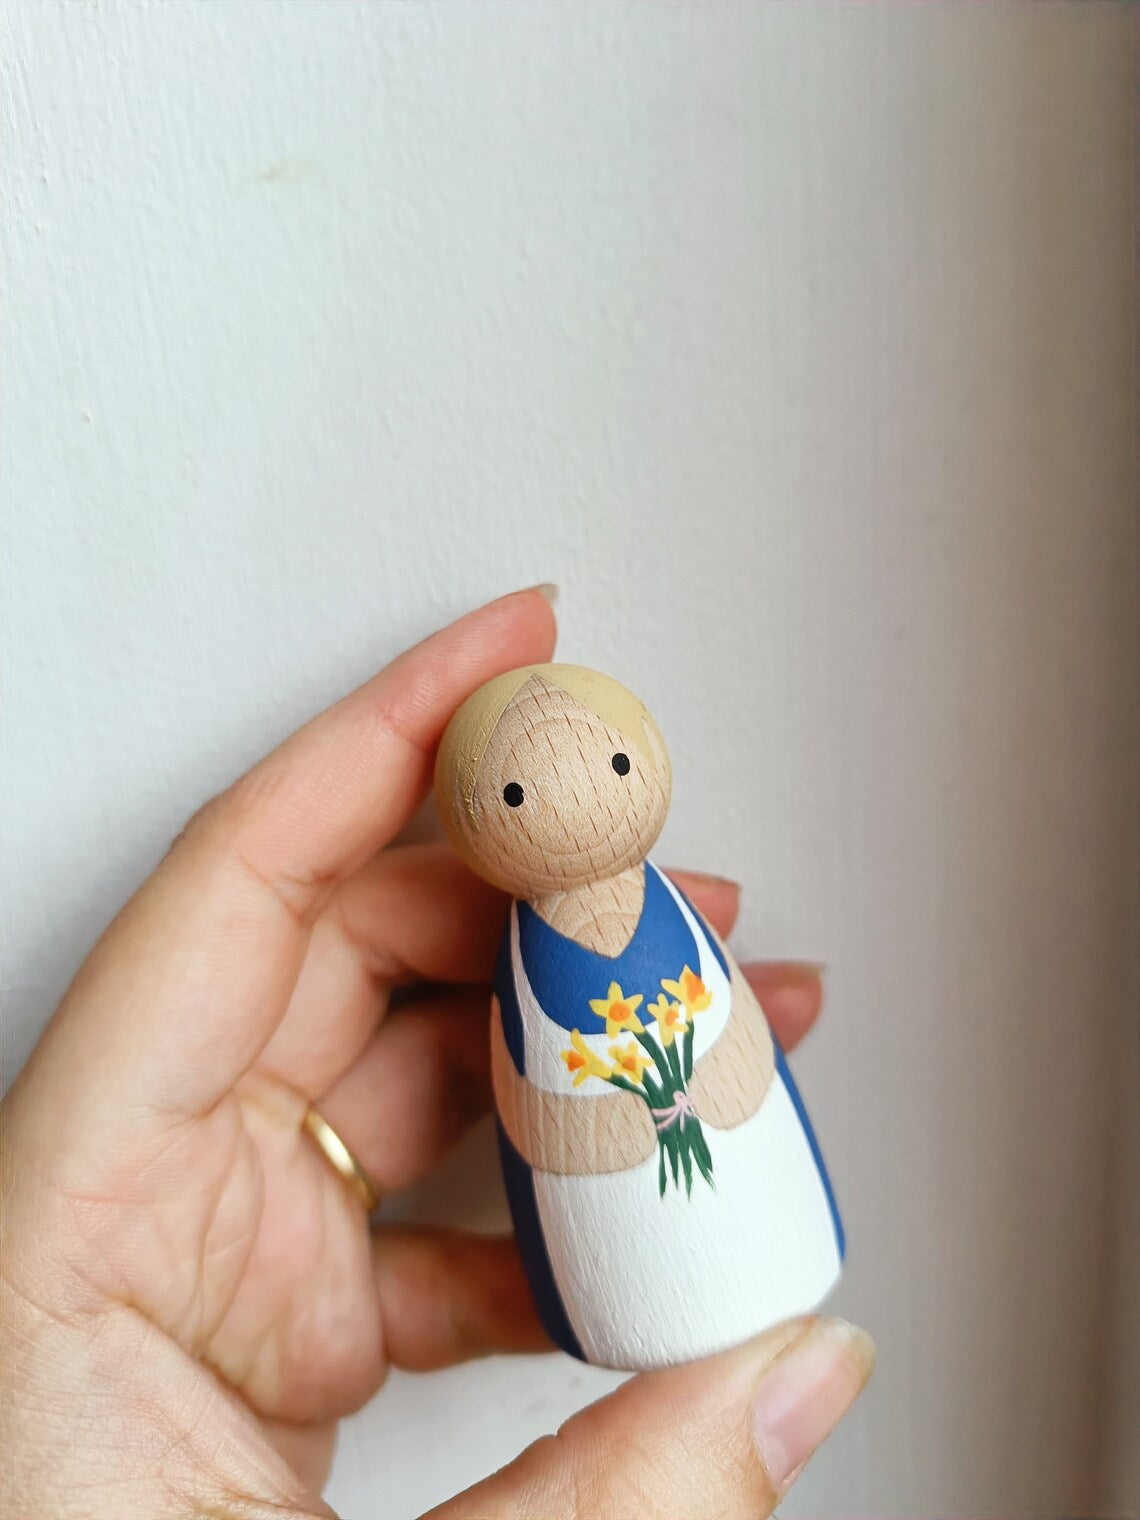 Personalised Mother's Day peg doll gift, Mother's day present from kids, gifts for Mum/Nana/Grandma/Nanny, first mother's day